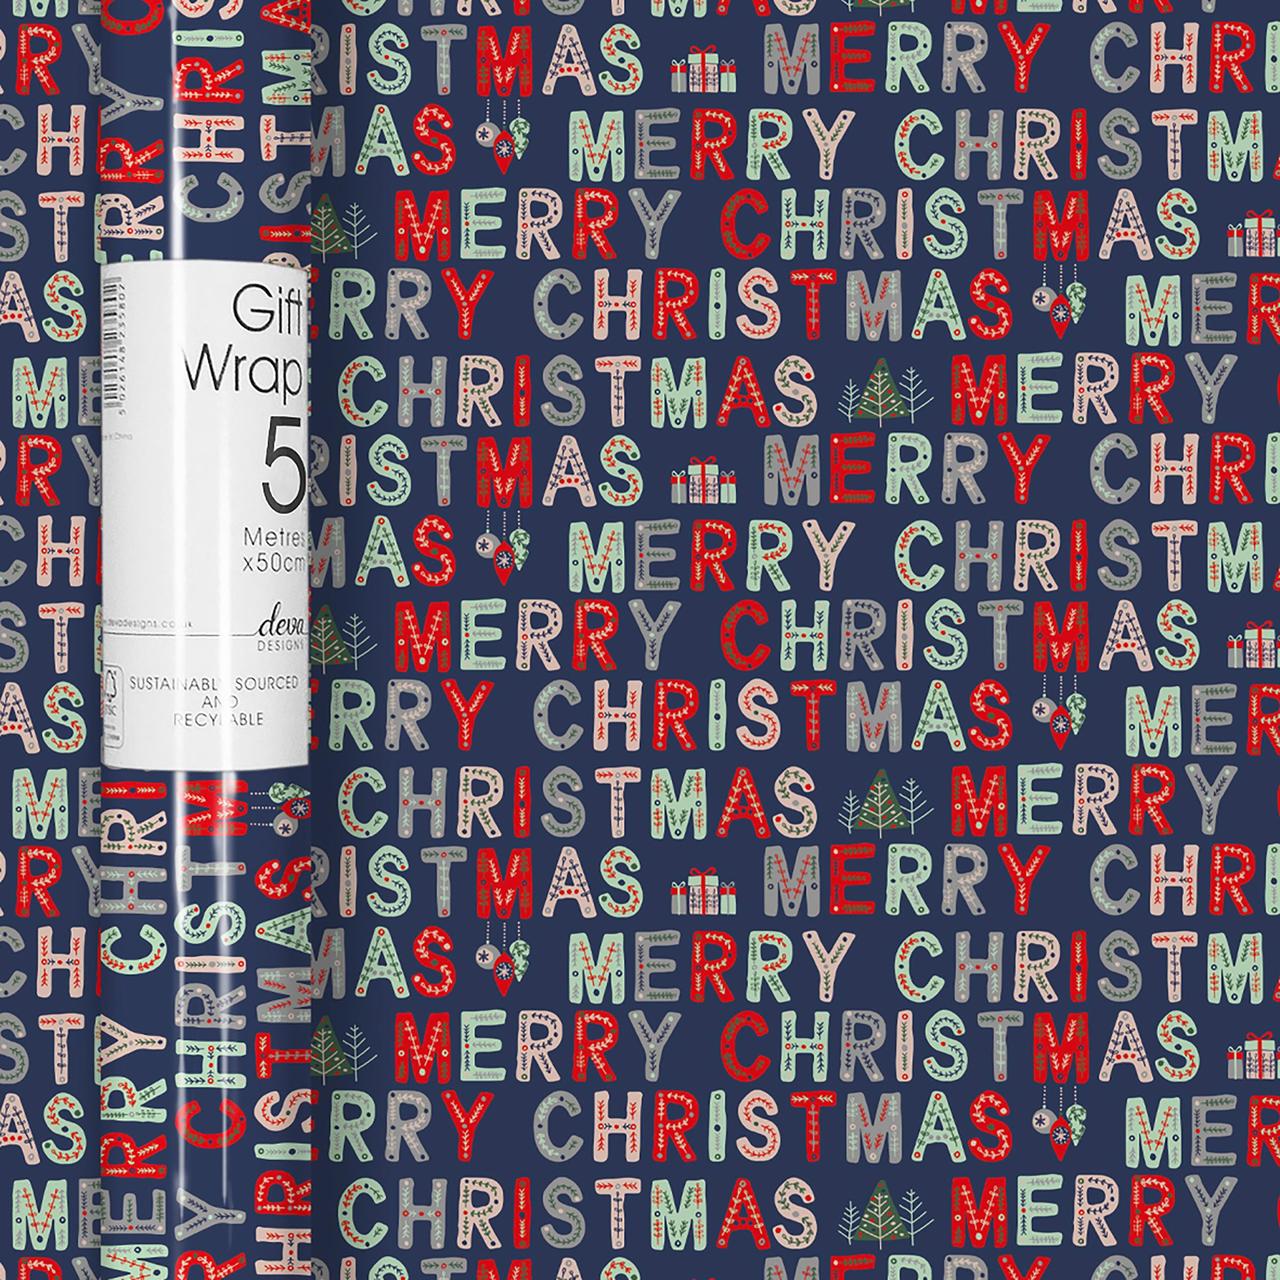 Christmas Gift Wrap Roll | 5m x 50cm Merry Christmas  by Weirs of Baggot Street